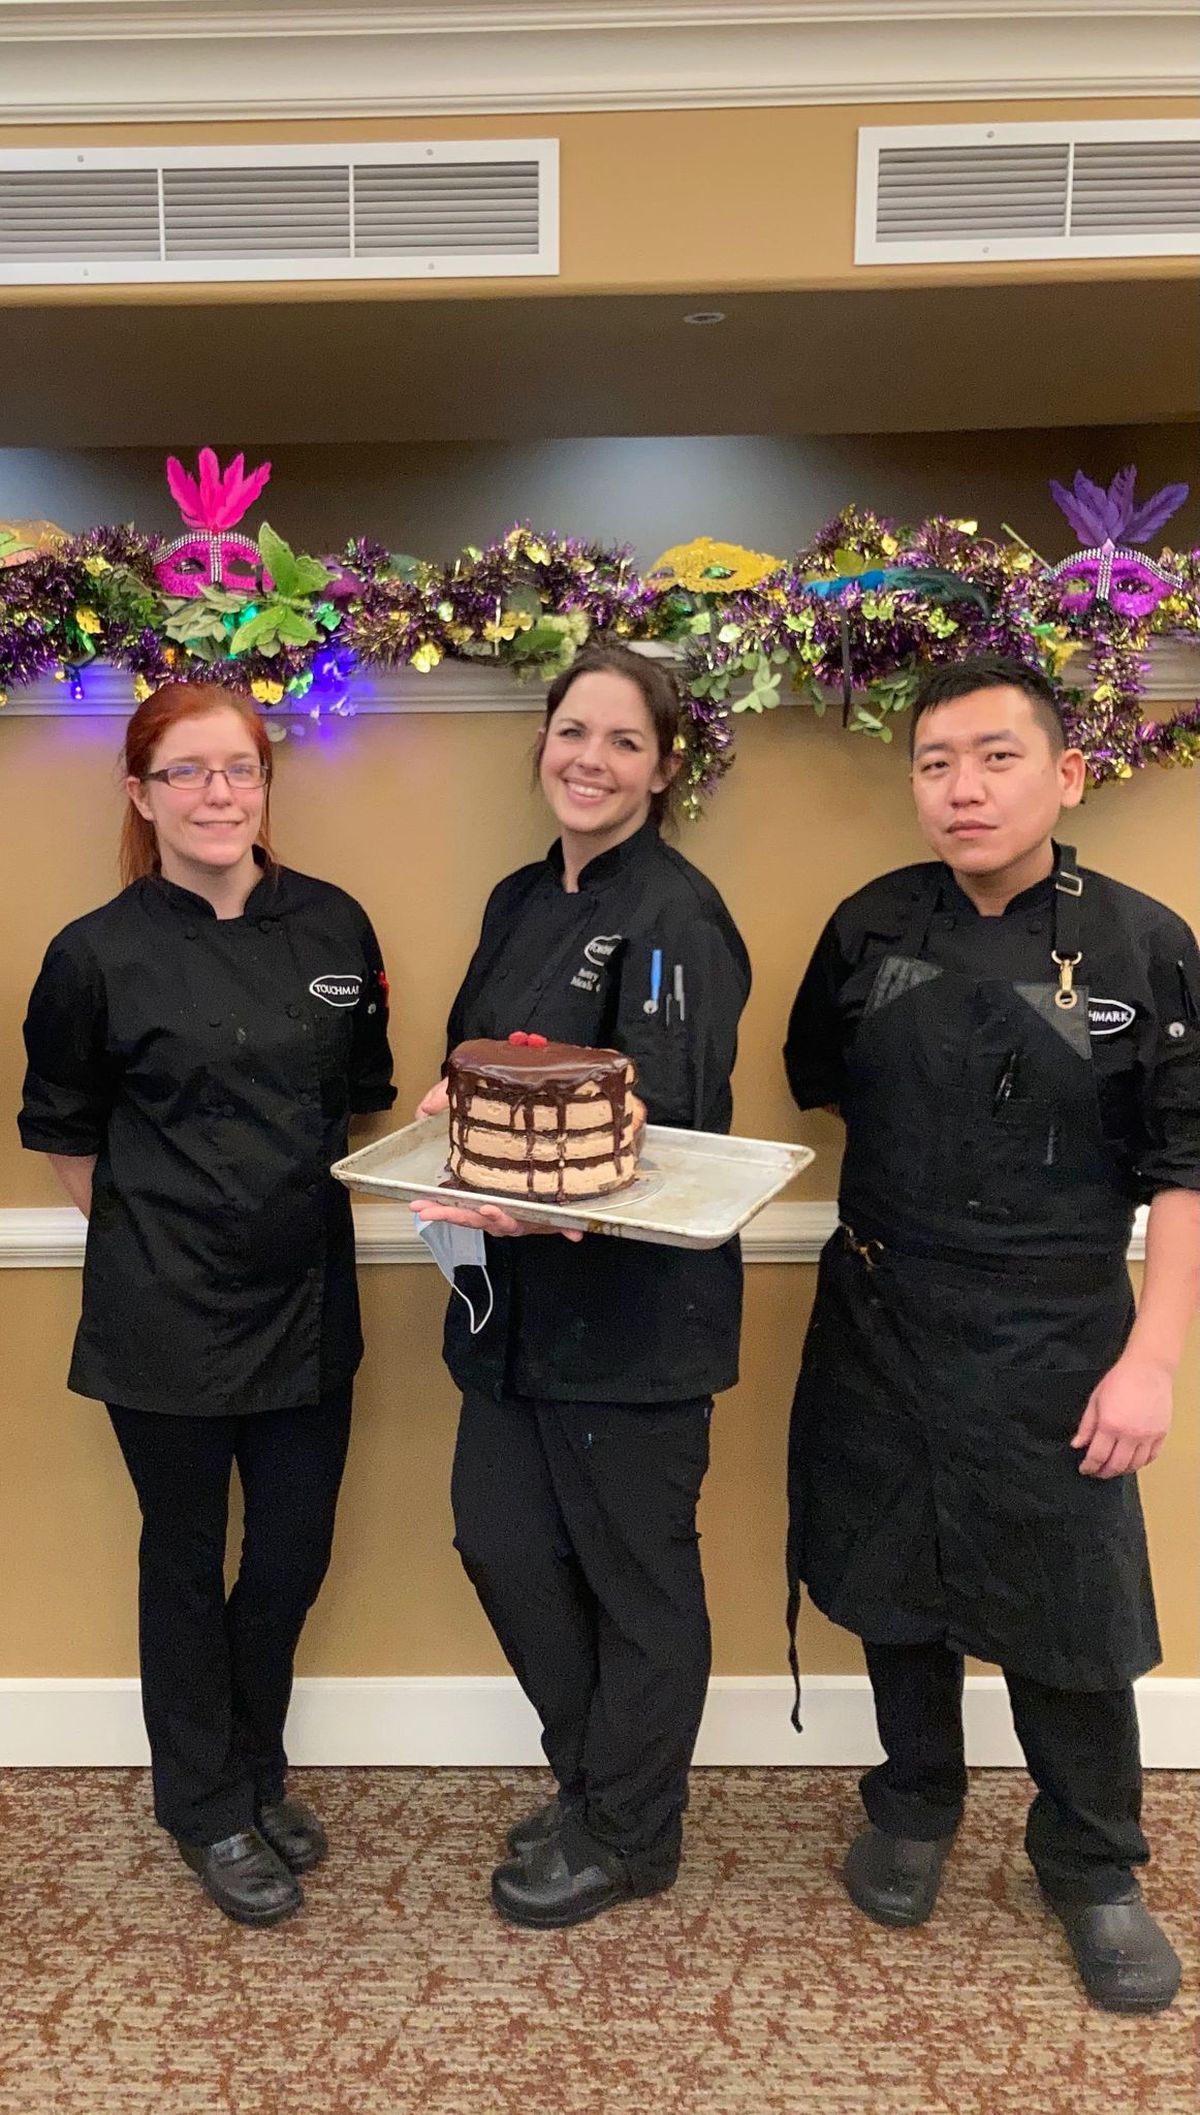 Micah Henderling, flanked by Bethany Meyer and Chong Vang, holds a chocolate ganache cake at Touchmark on South Hill.  (Kris Kilduff/For The Spokesman-Review)